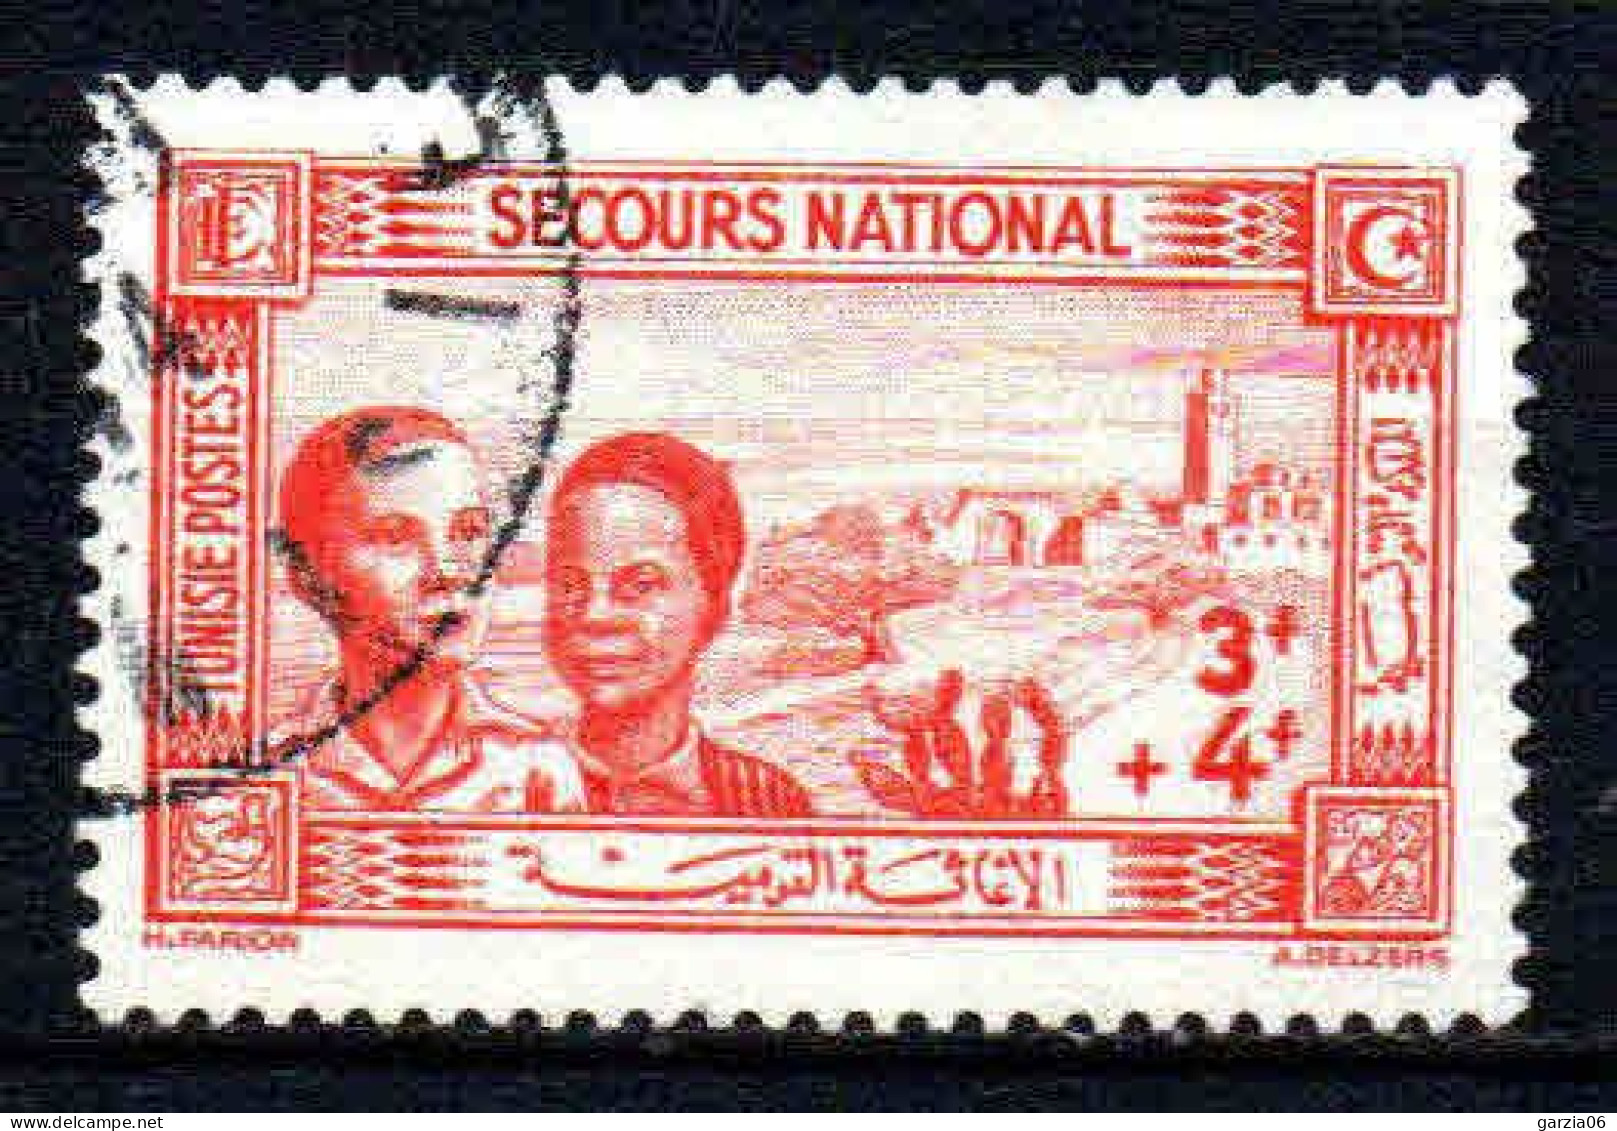 Tunisie  - 1944 - Secours National - N° 248  - Oblit - Used - Gebraucht